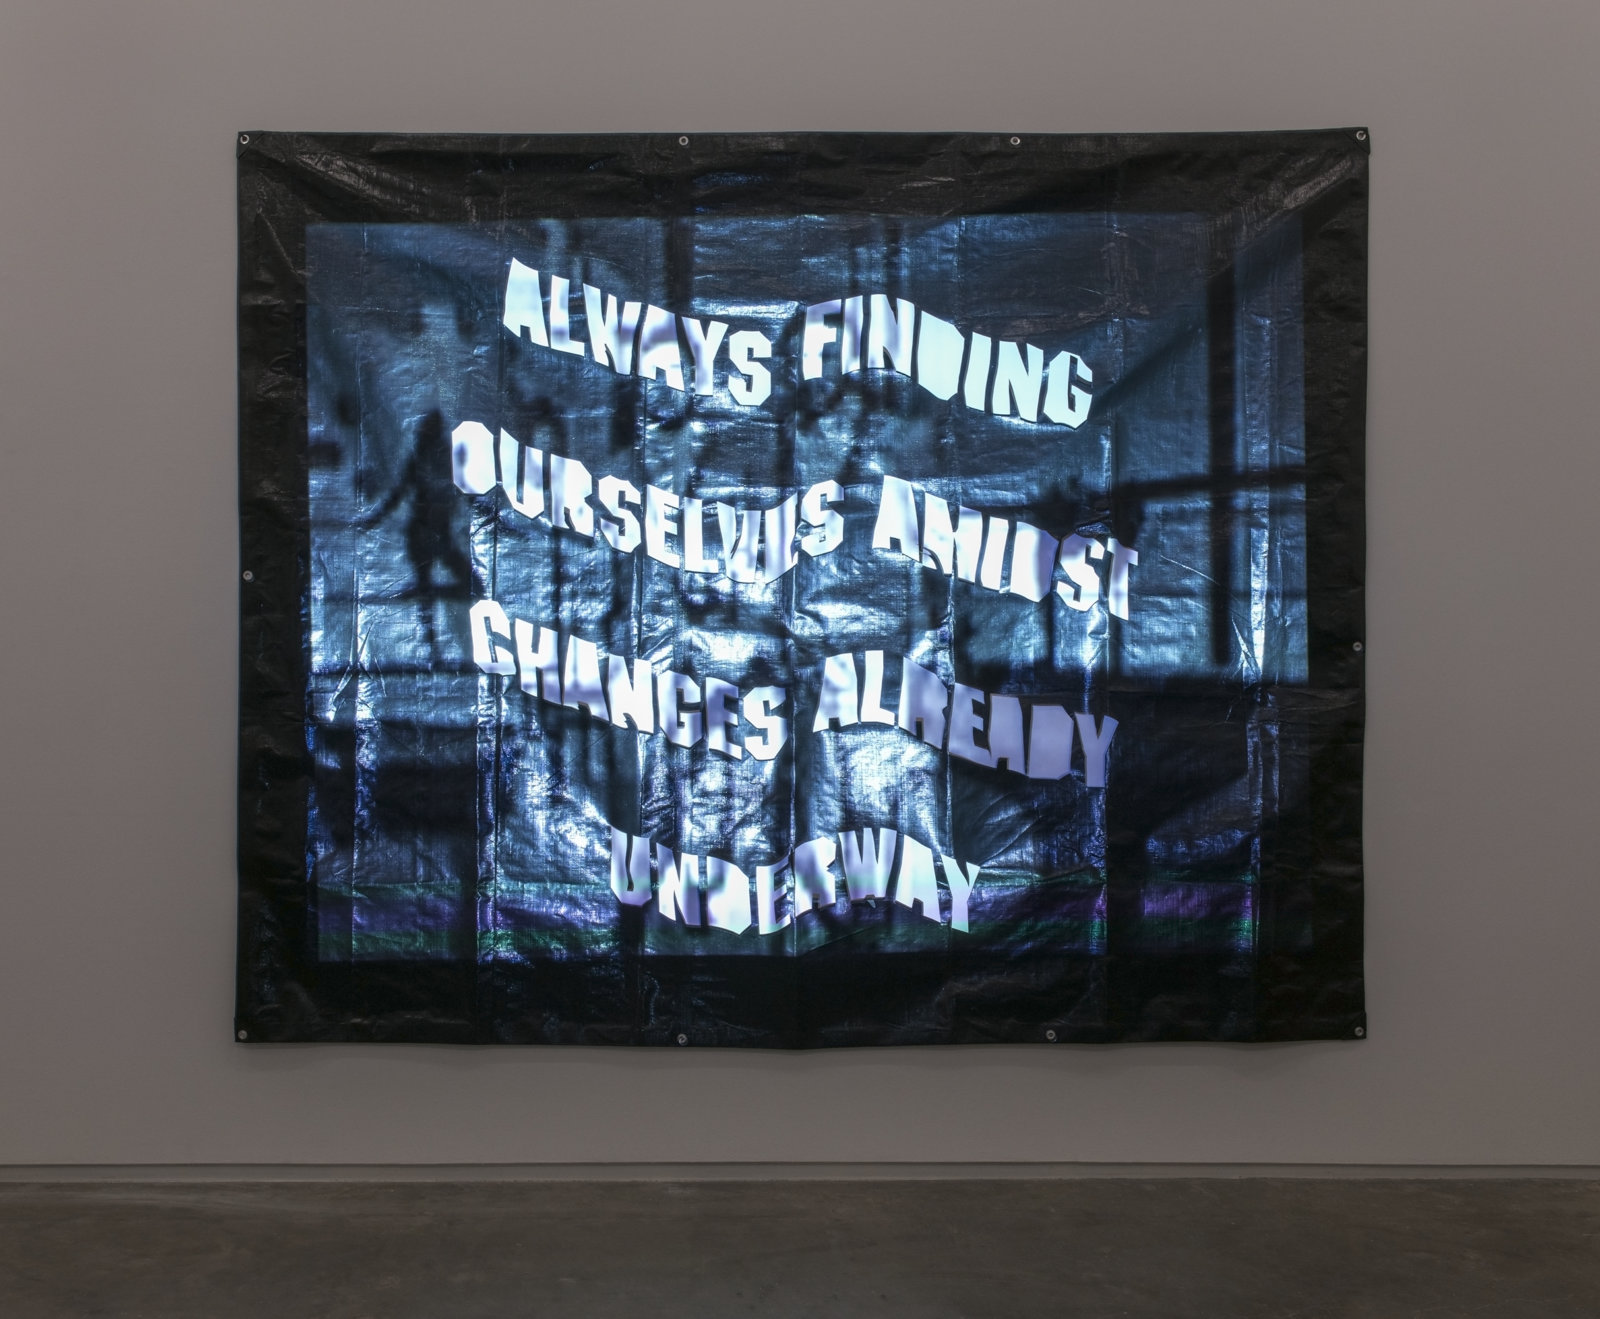 Raymond Boisjoly, Silent Trans-Forming, 2014, video projection on tarp, 96 x 120 in. (244 x 305 cm)